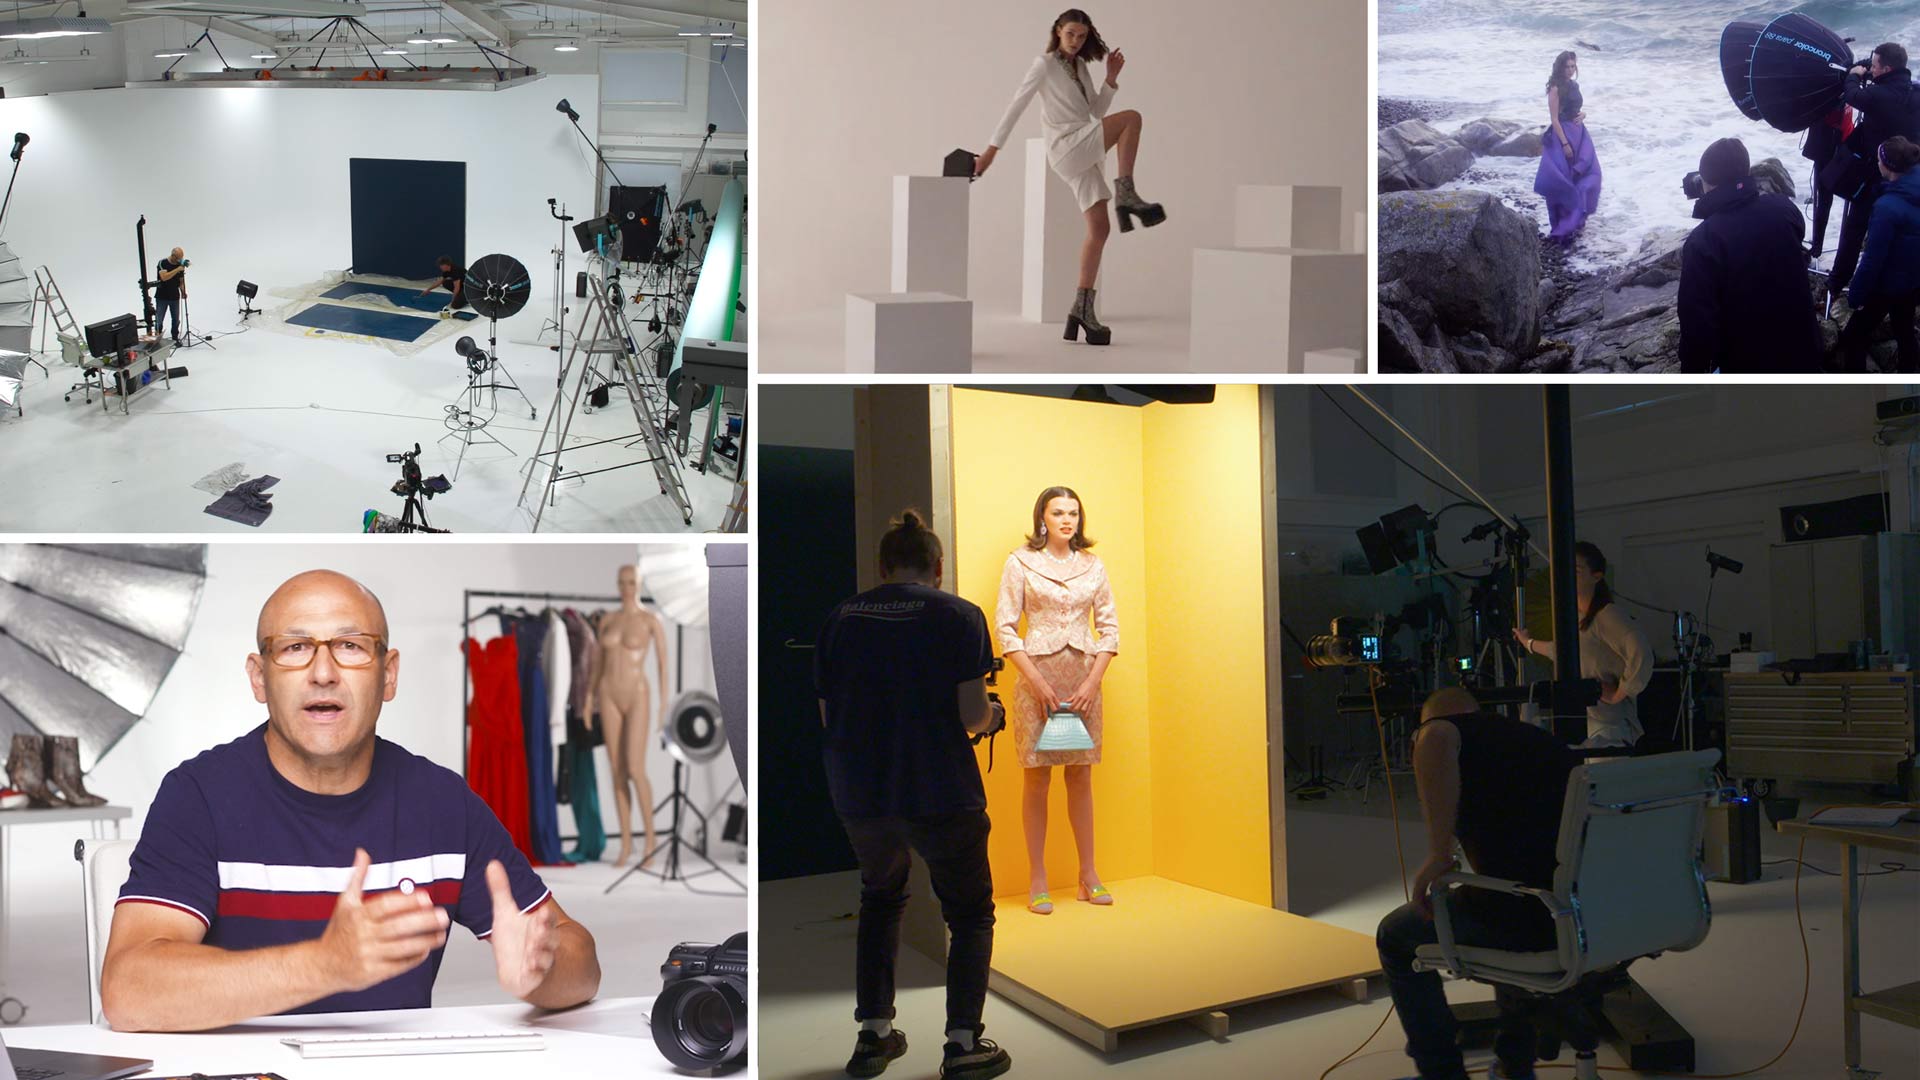 Sets, Props and Locations for Fashion Photography